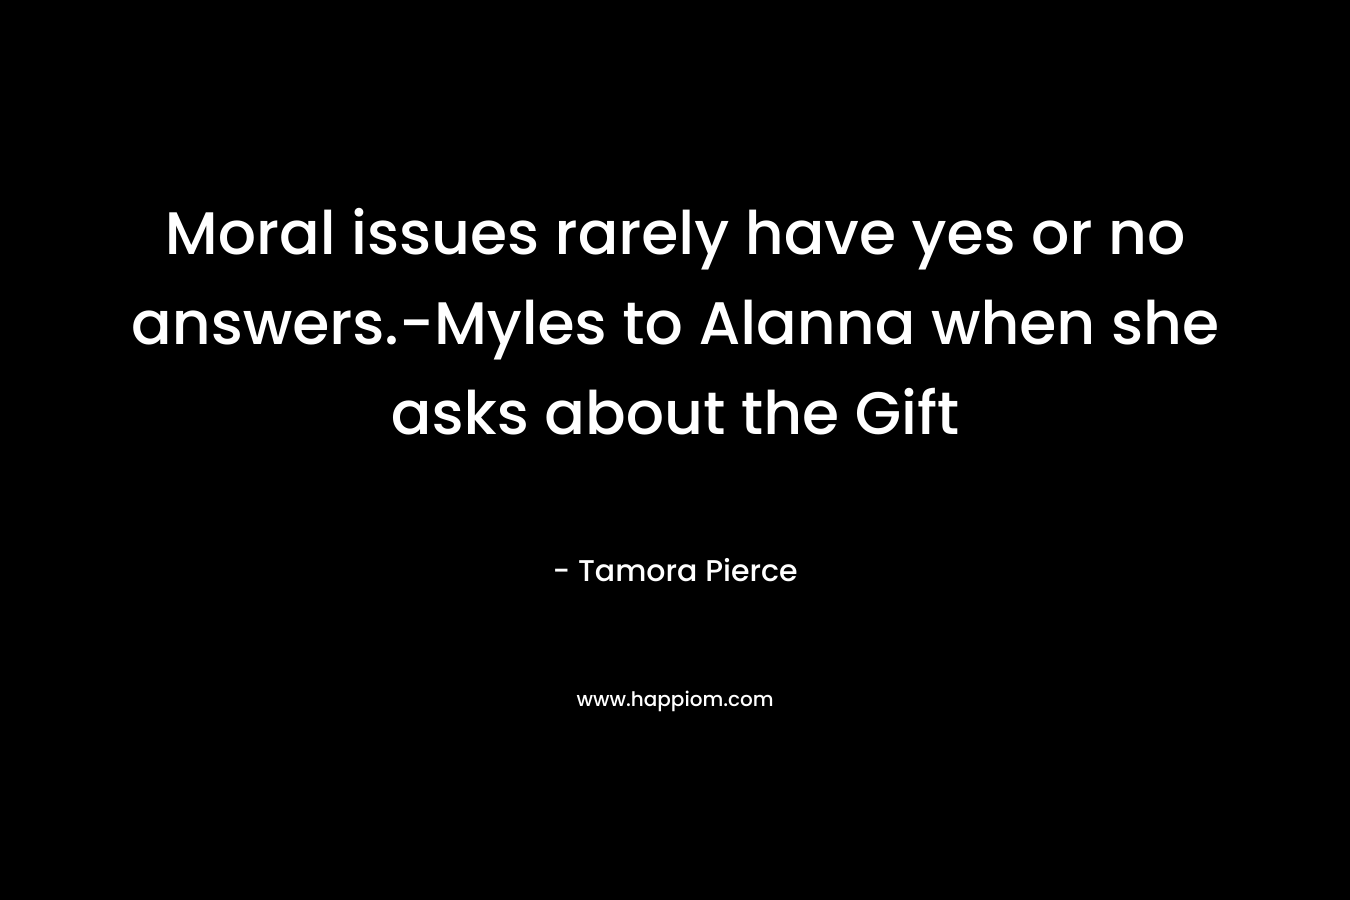 Moral issues rarely have yes or no answers.-Myles to Alanna when she asks about the Gift – Tamora Pierce